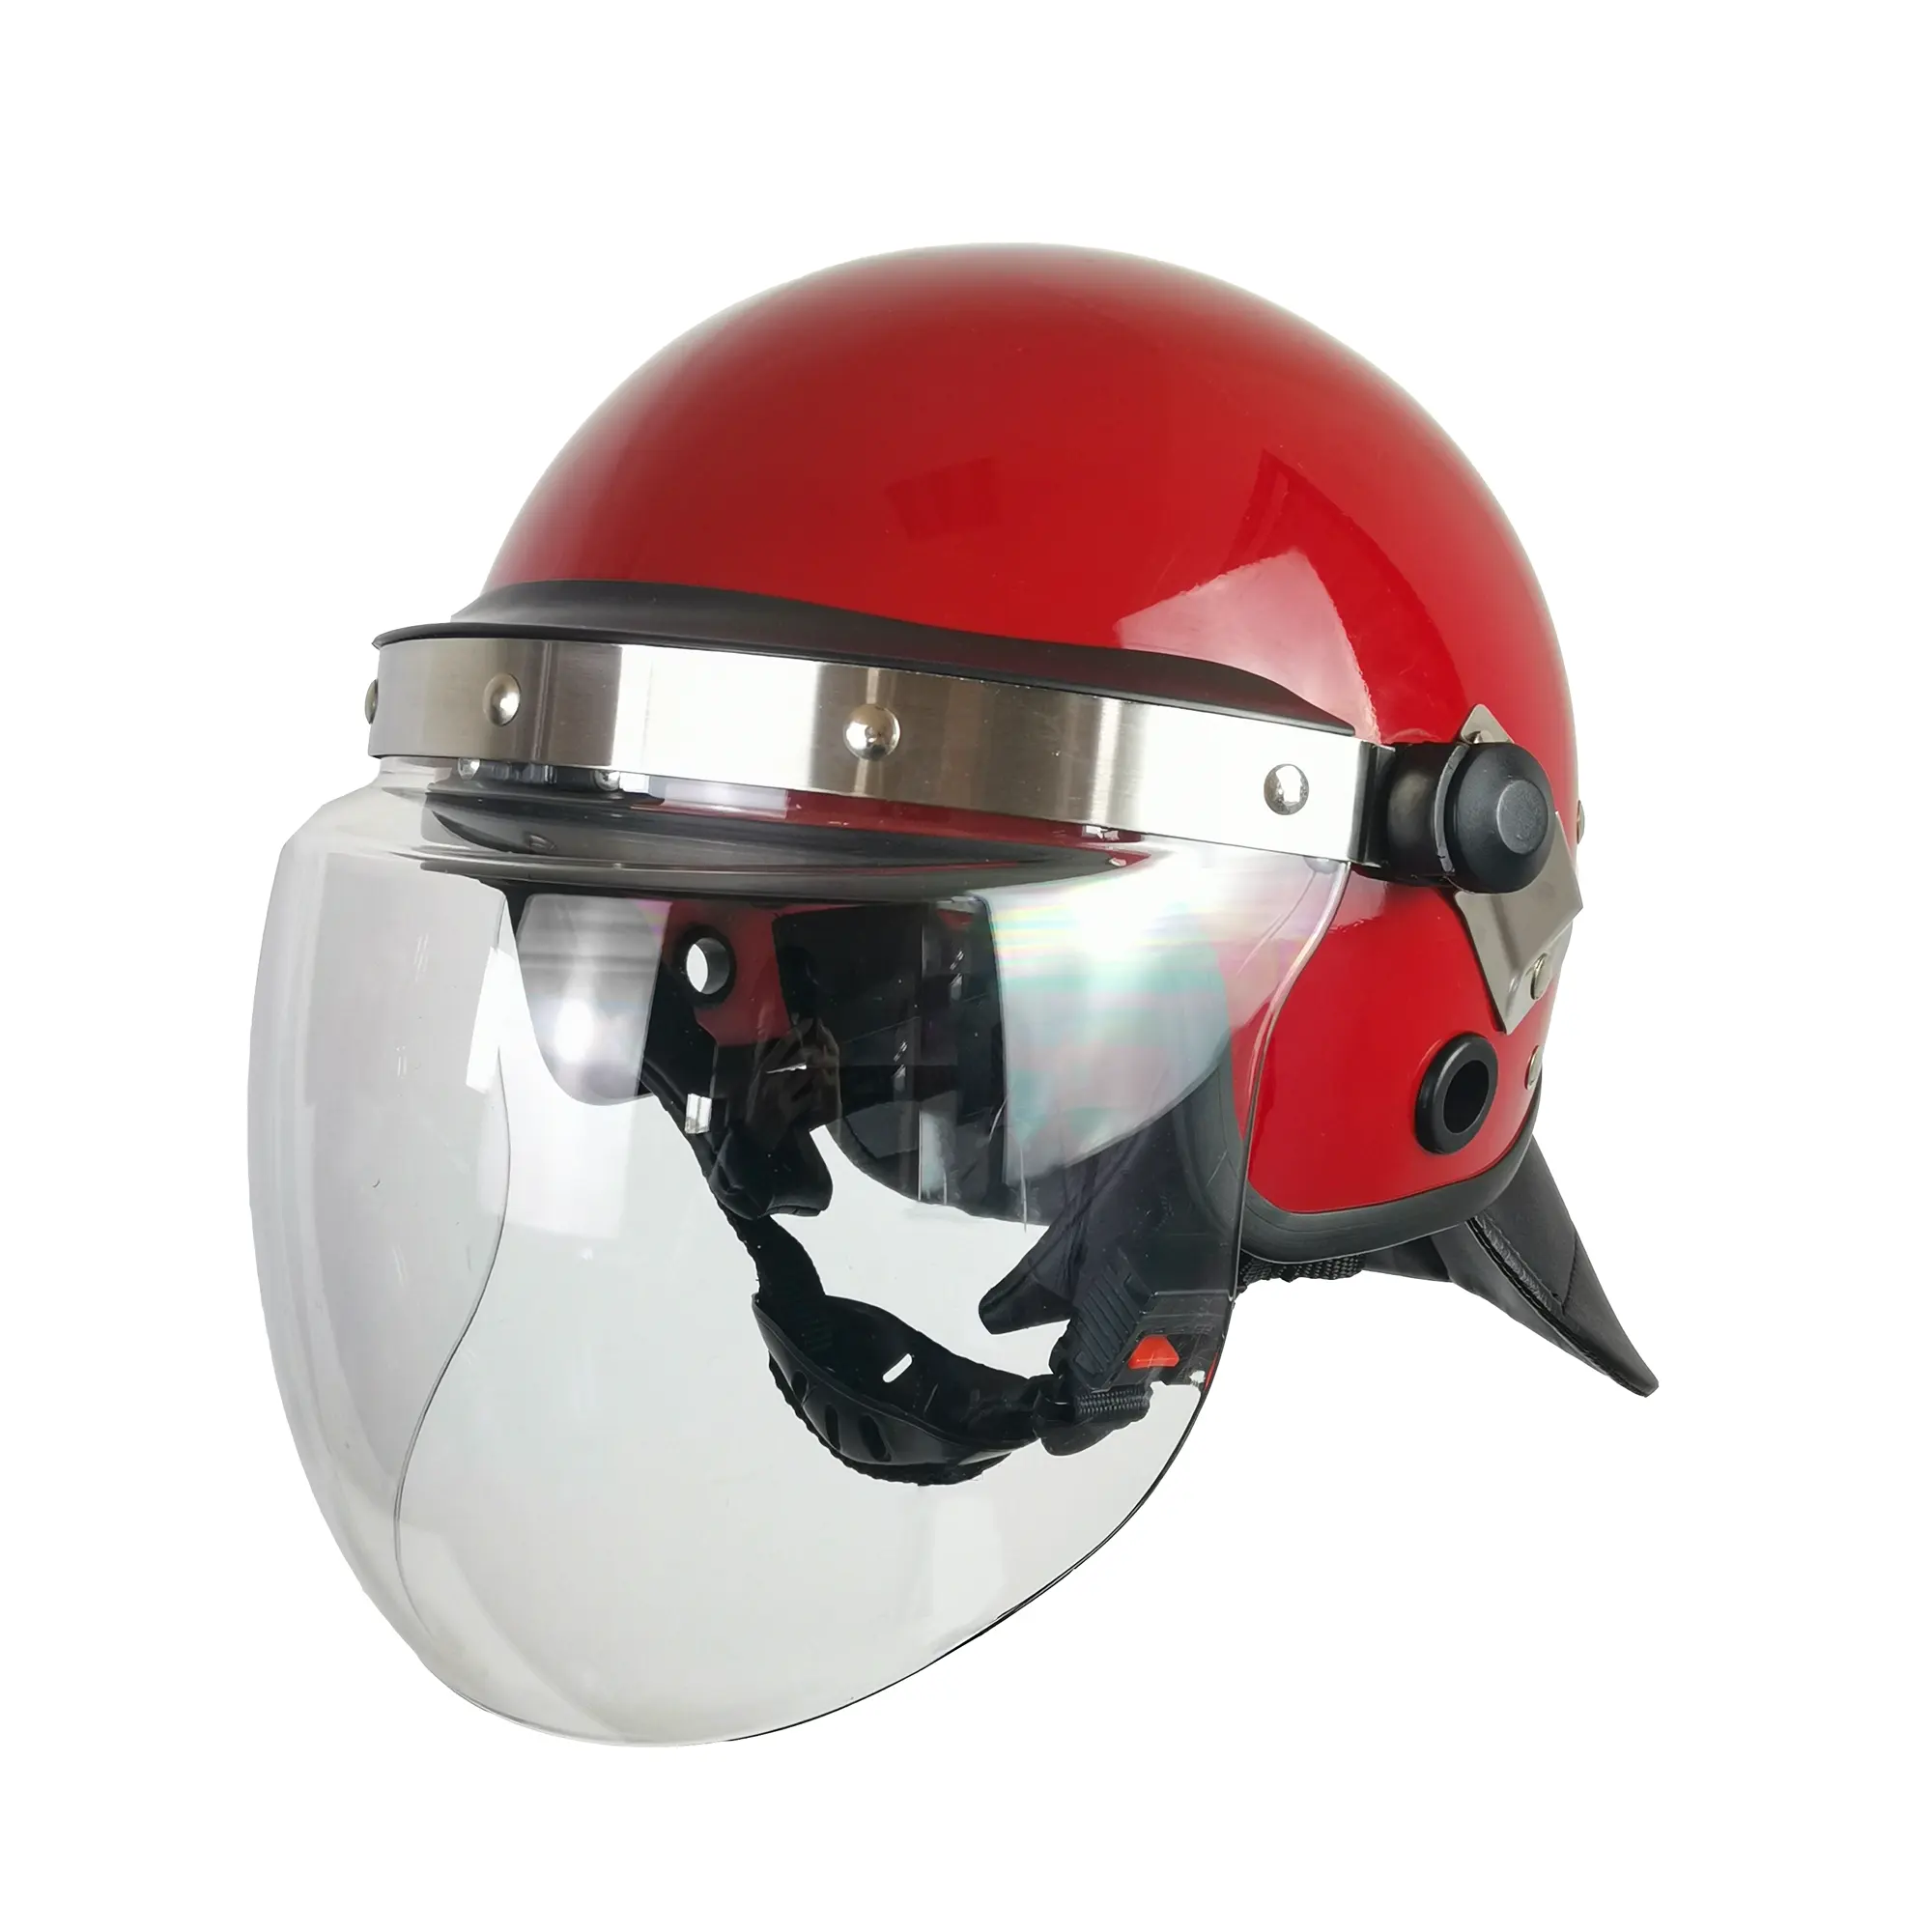 Doublesafe ABS Full Head Face Personal Protection Gear Helmet Equipment Hard Hat Protective Riot Helmet Visors